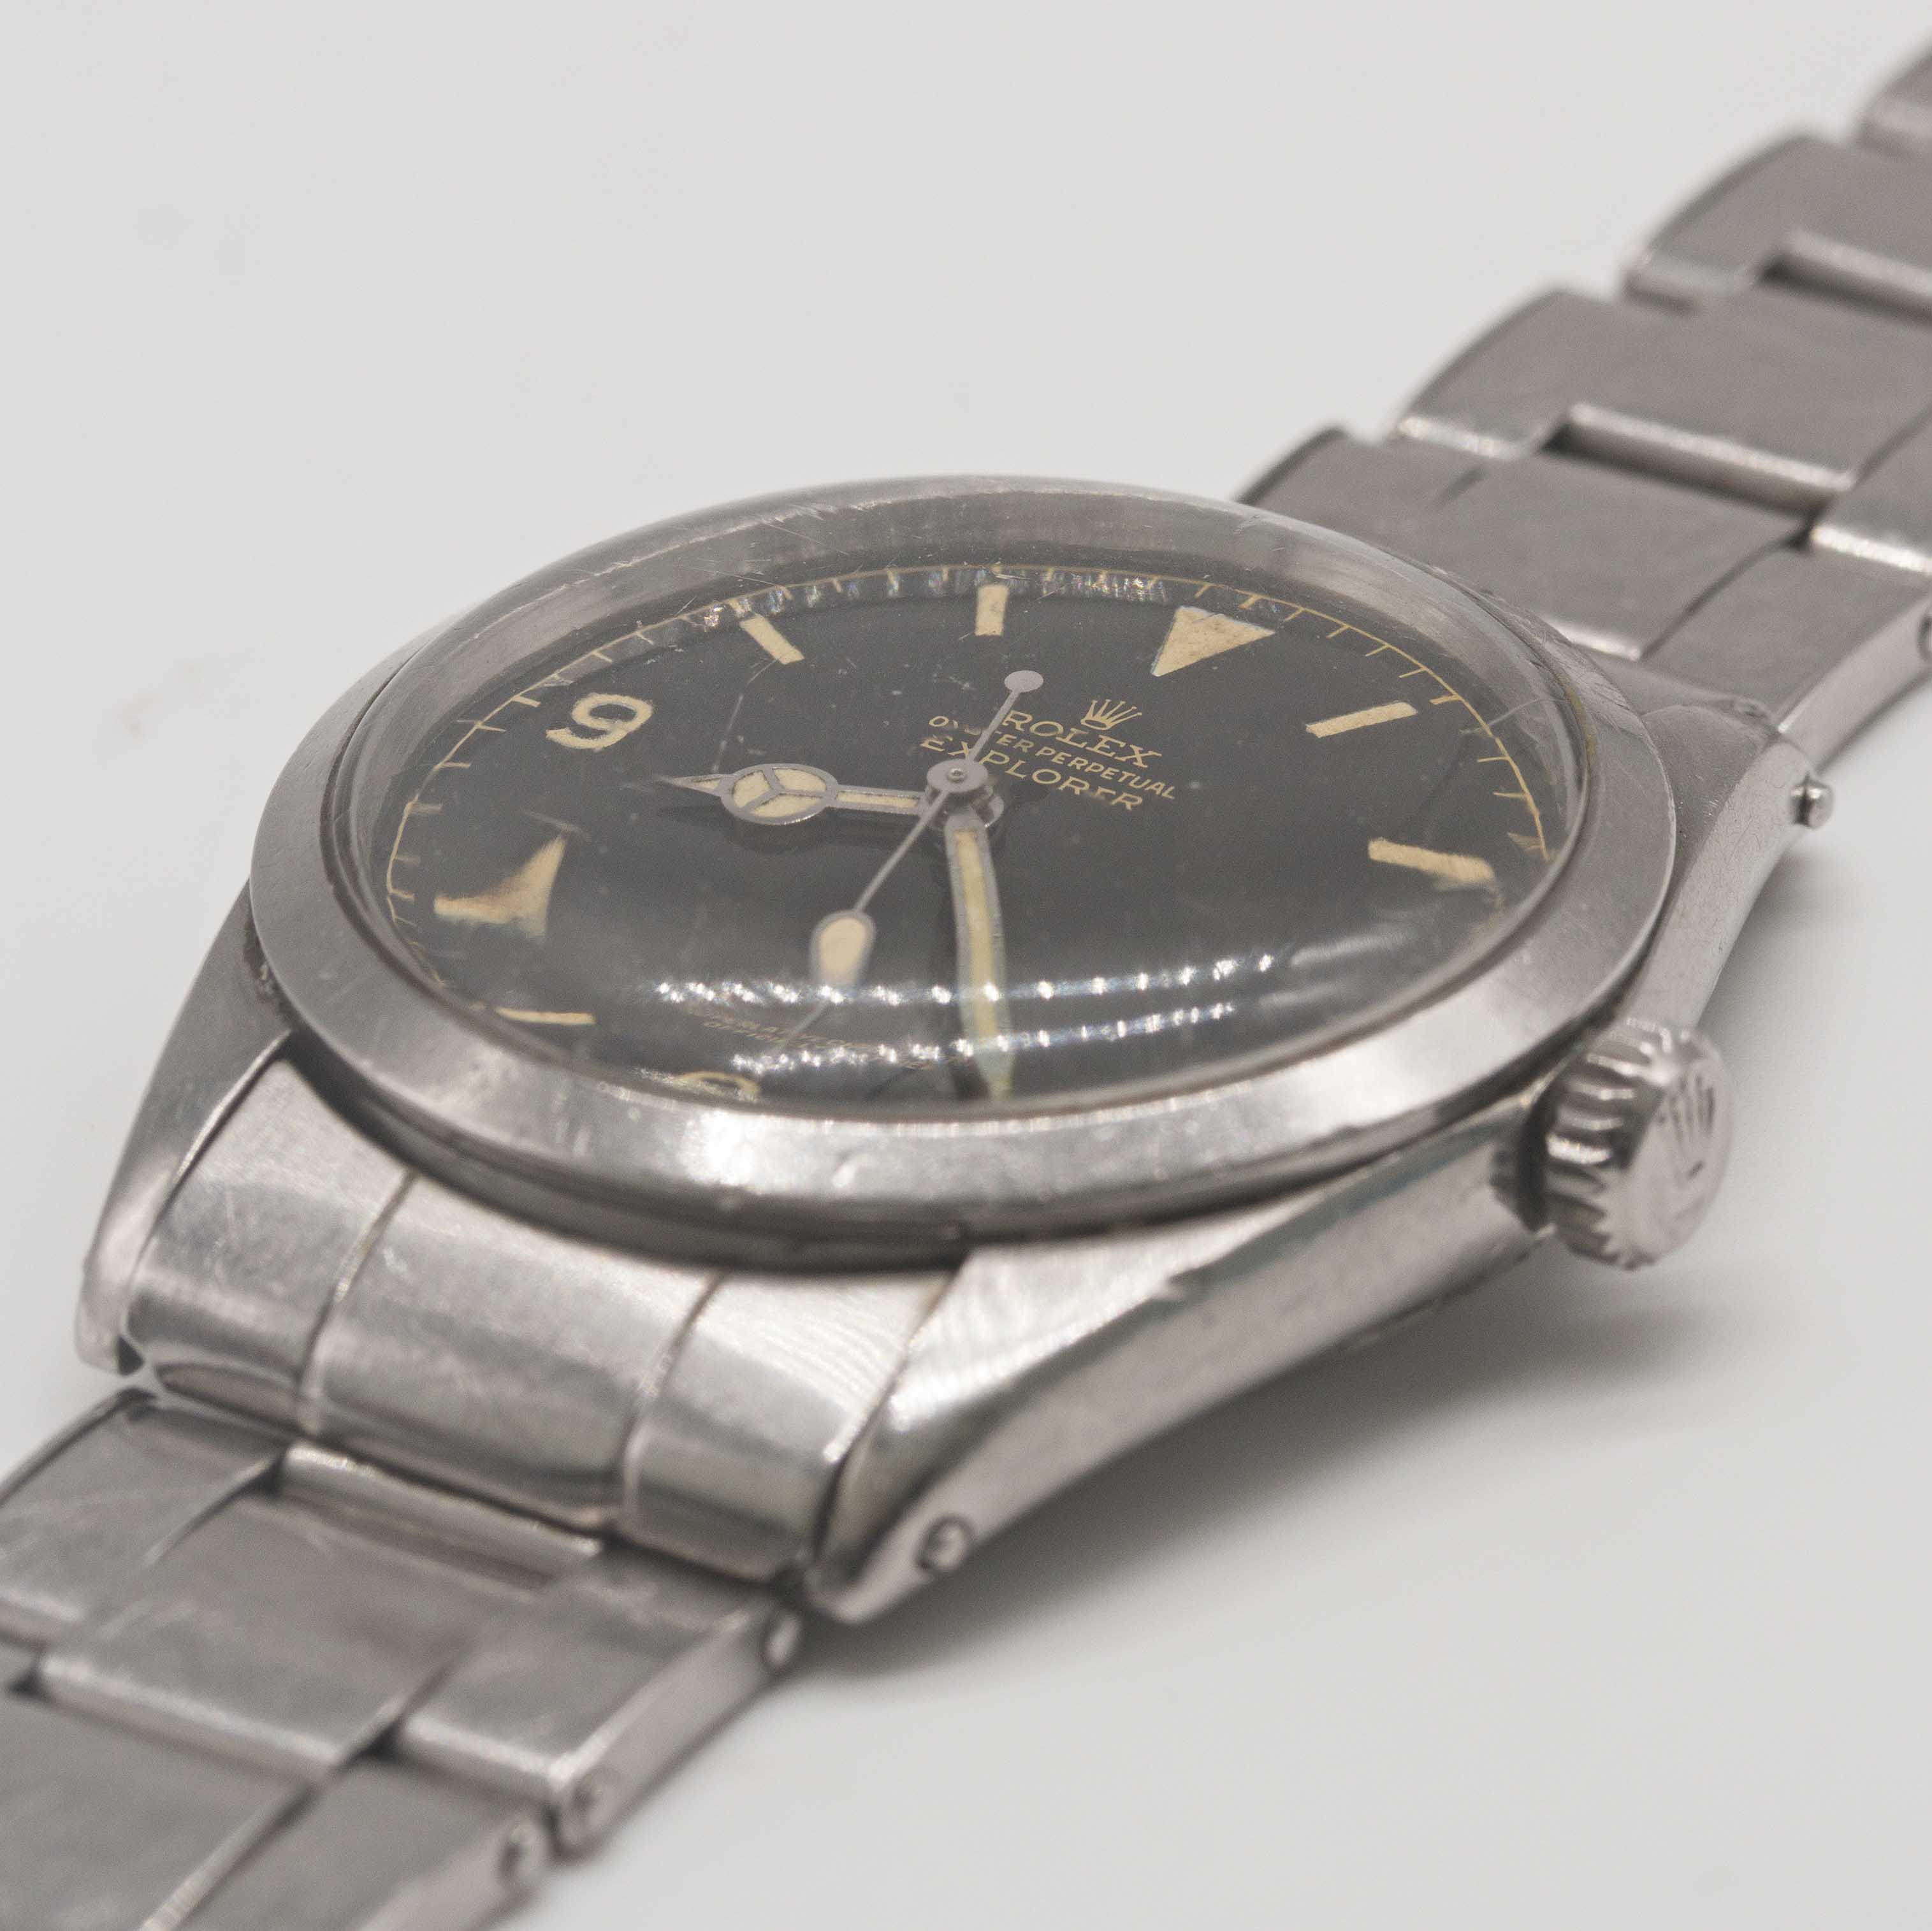 A VERY RARE GENTLEMAN'S STAINLESS STEEL ROLEX OYSTER PERPETUAL EXPLORER BRACELET WATCH CIRCA 1964, - Image 6 of 15